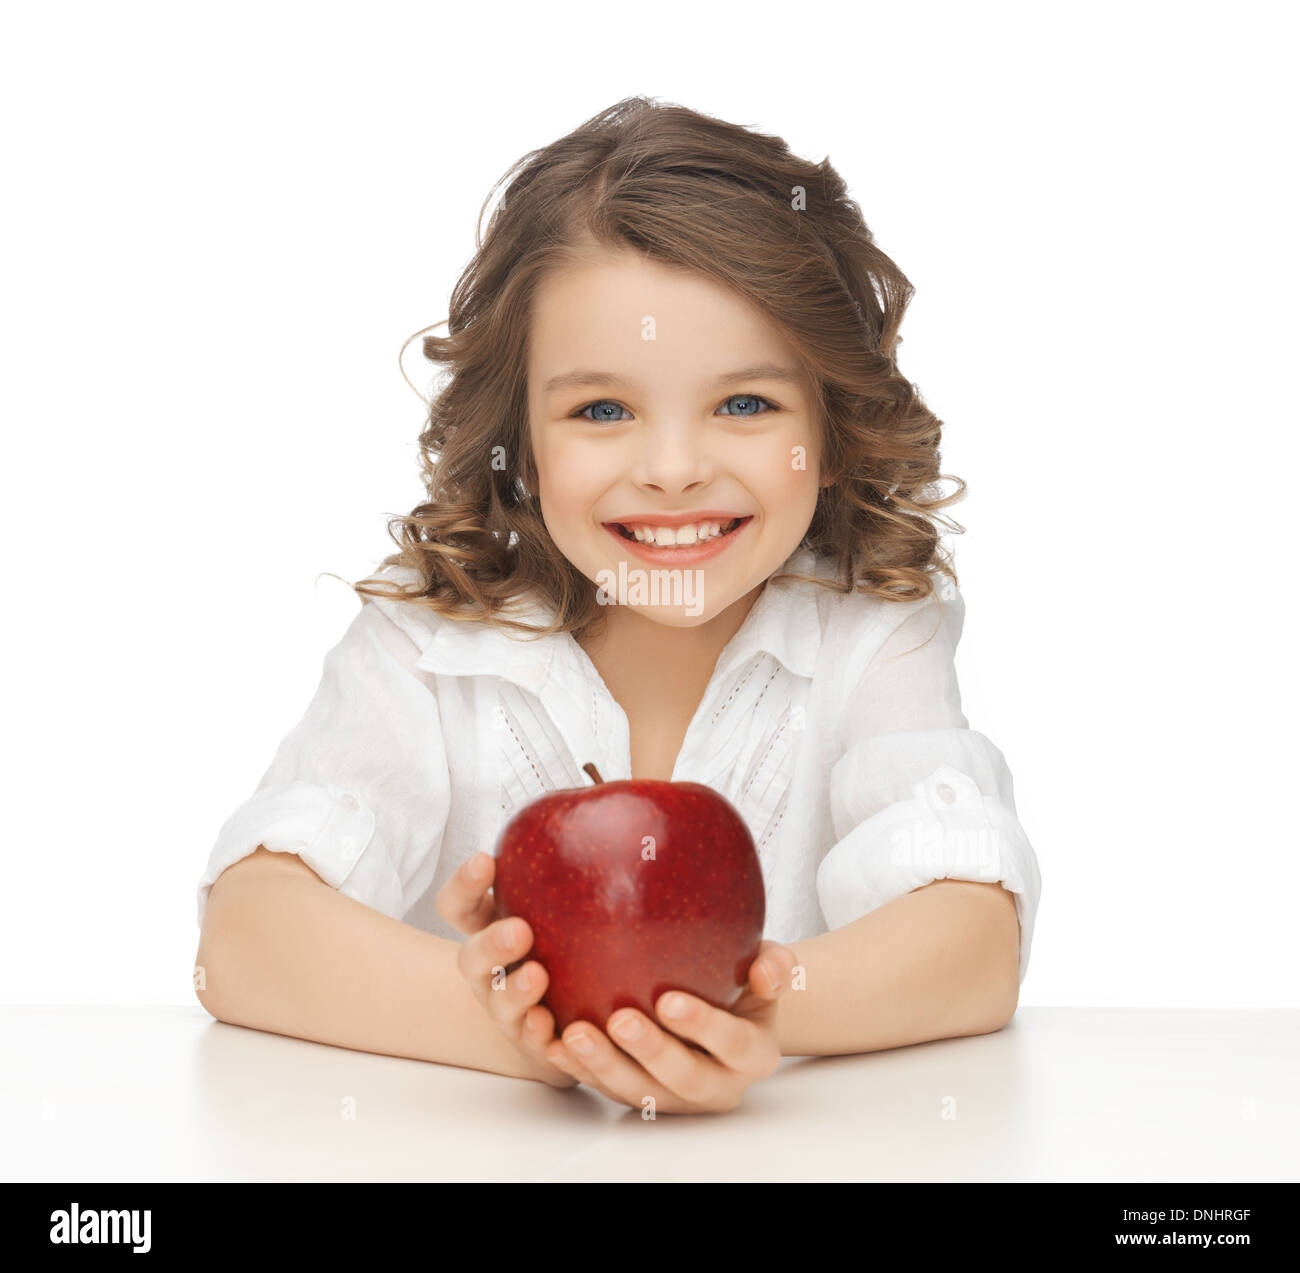 girl with red apple Stock Photo